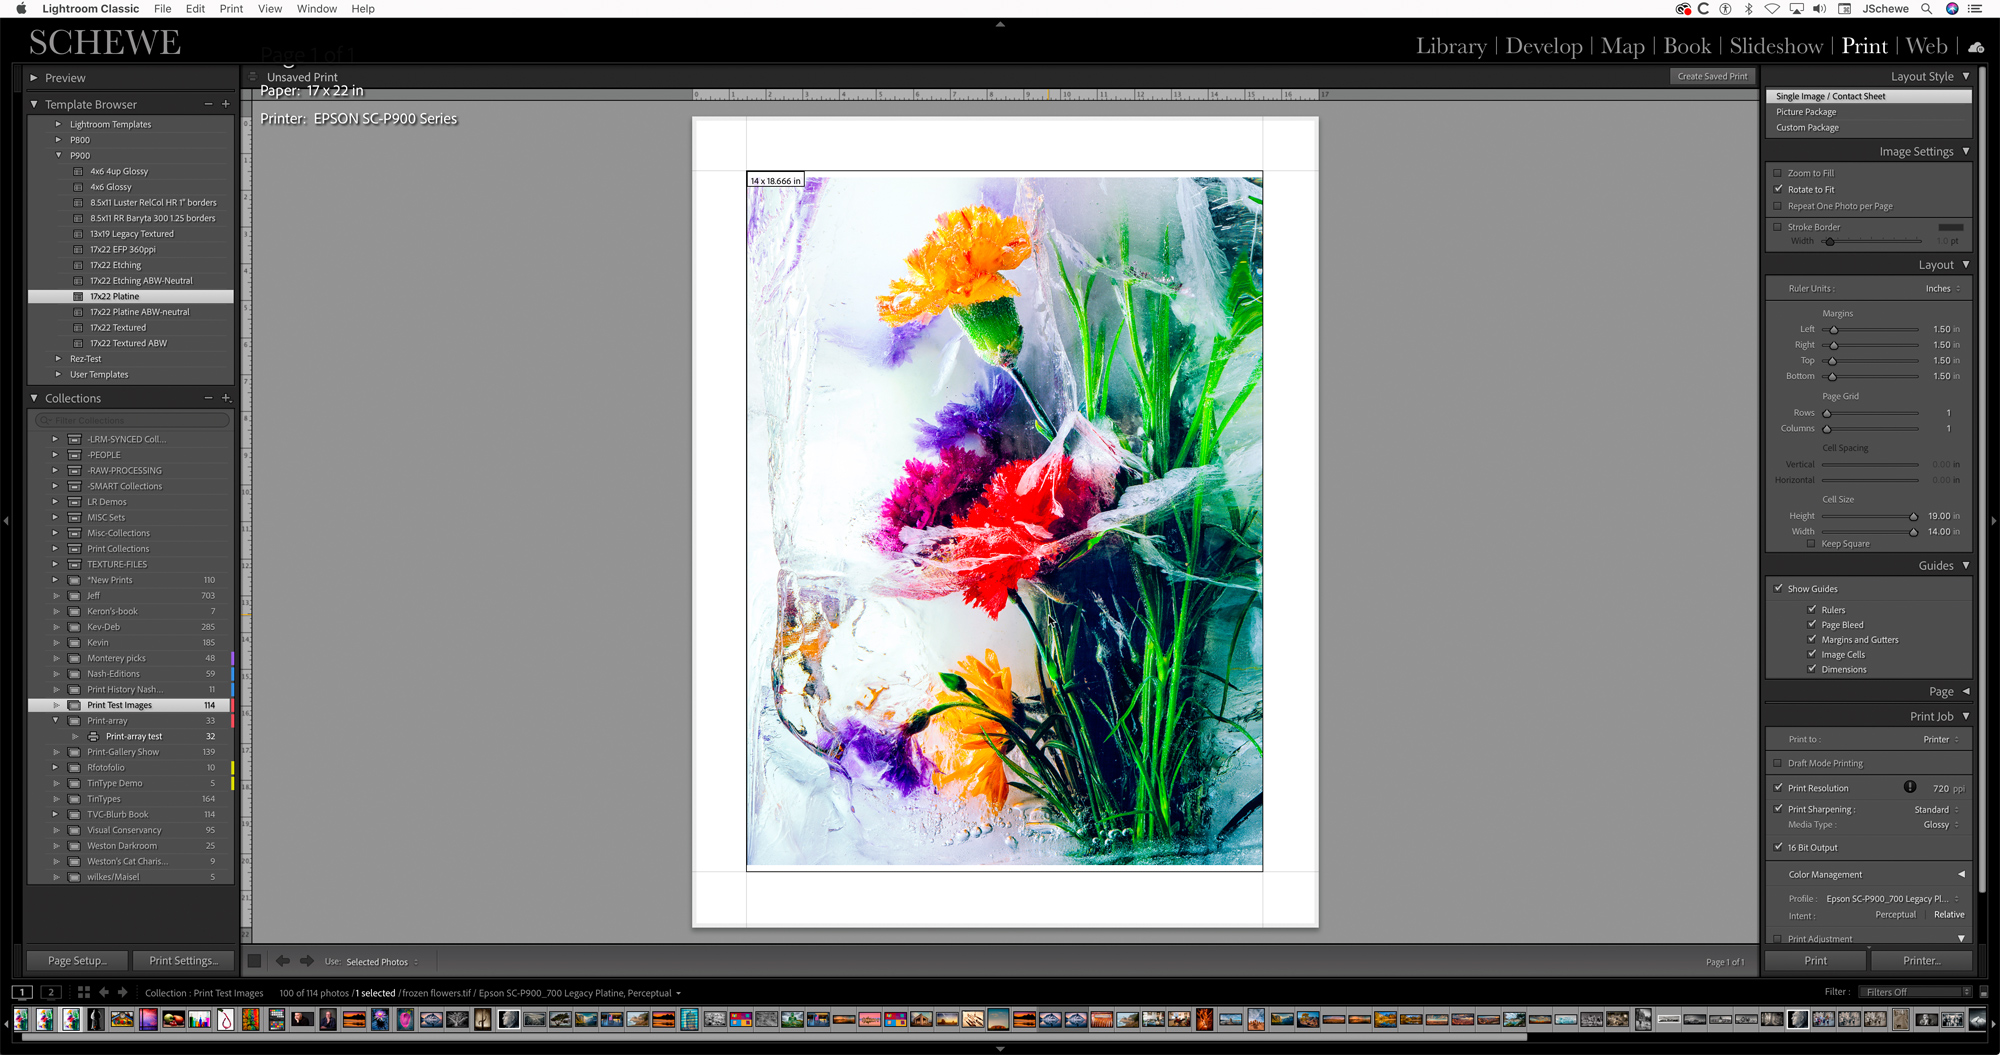 The main Print module of Lightroom. The image was set up to print to Epson Legacy Platine paper using the Perceptual rendering intent. I set the resolution to interpolate up to 720 PPI.